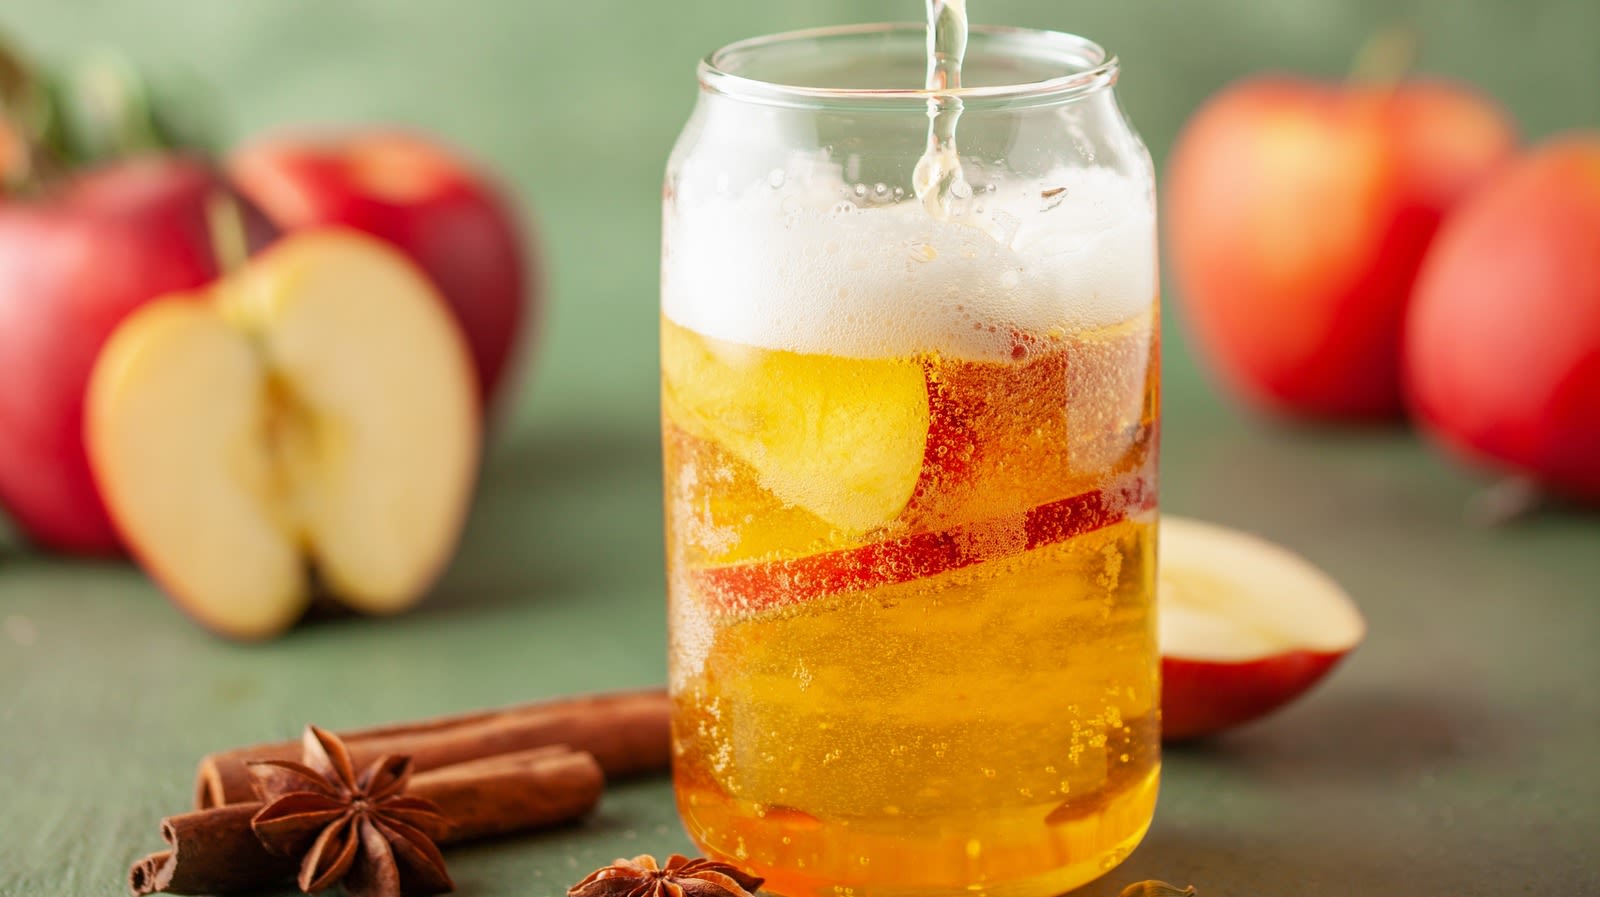 How To Pick The Best Glass For Drinking Hard Cider Like A Pro